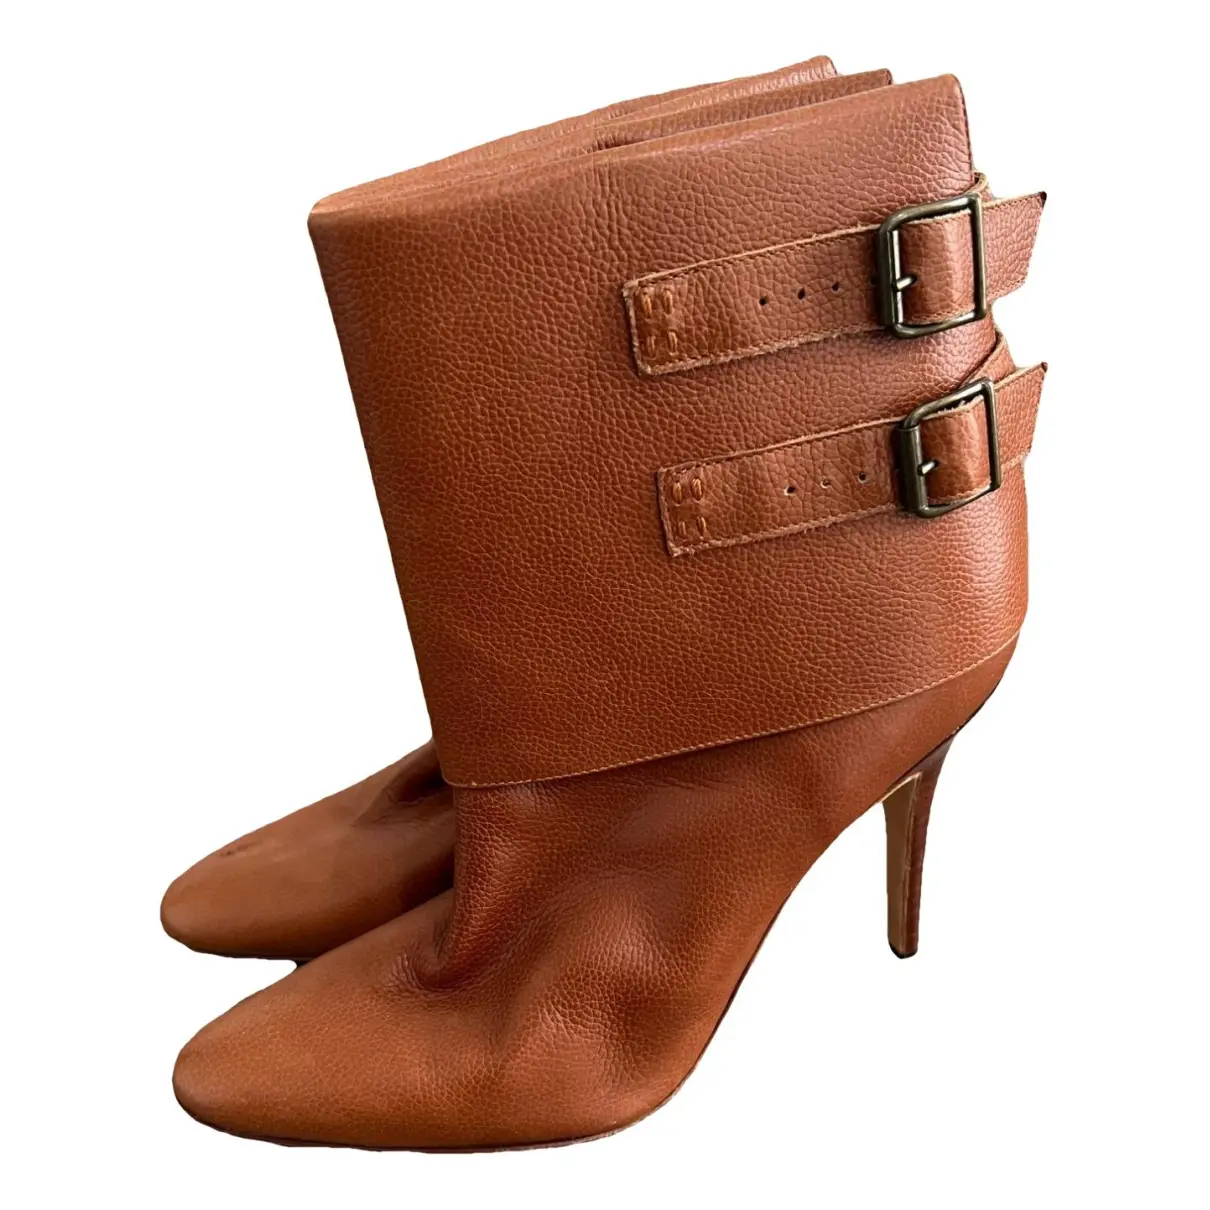 Leather buckled boots